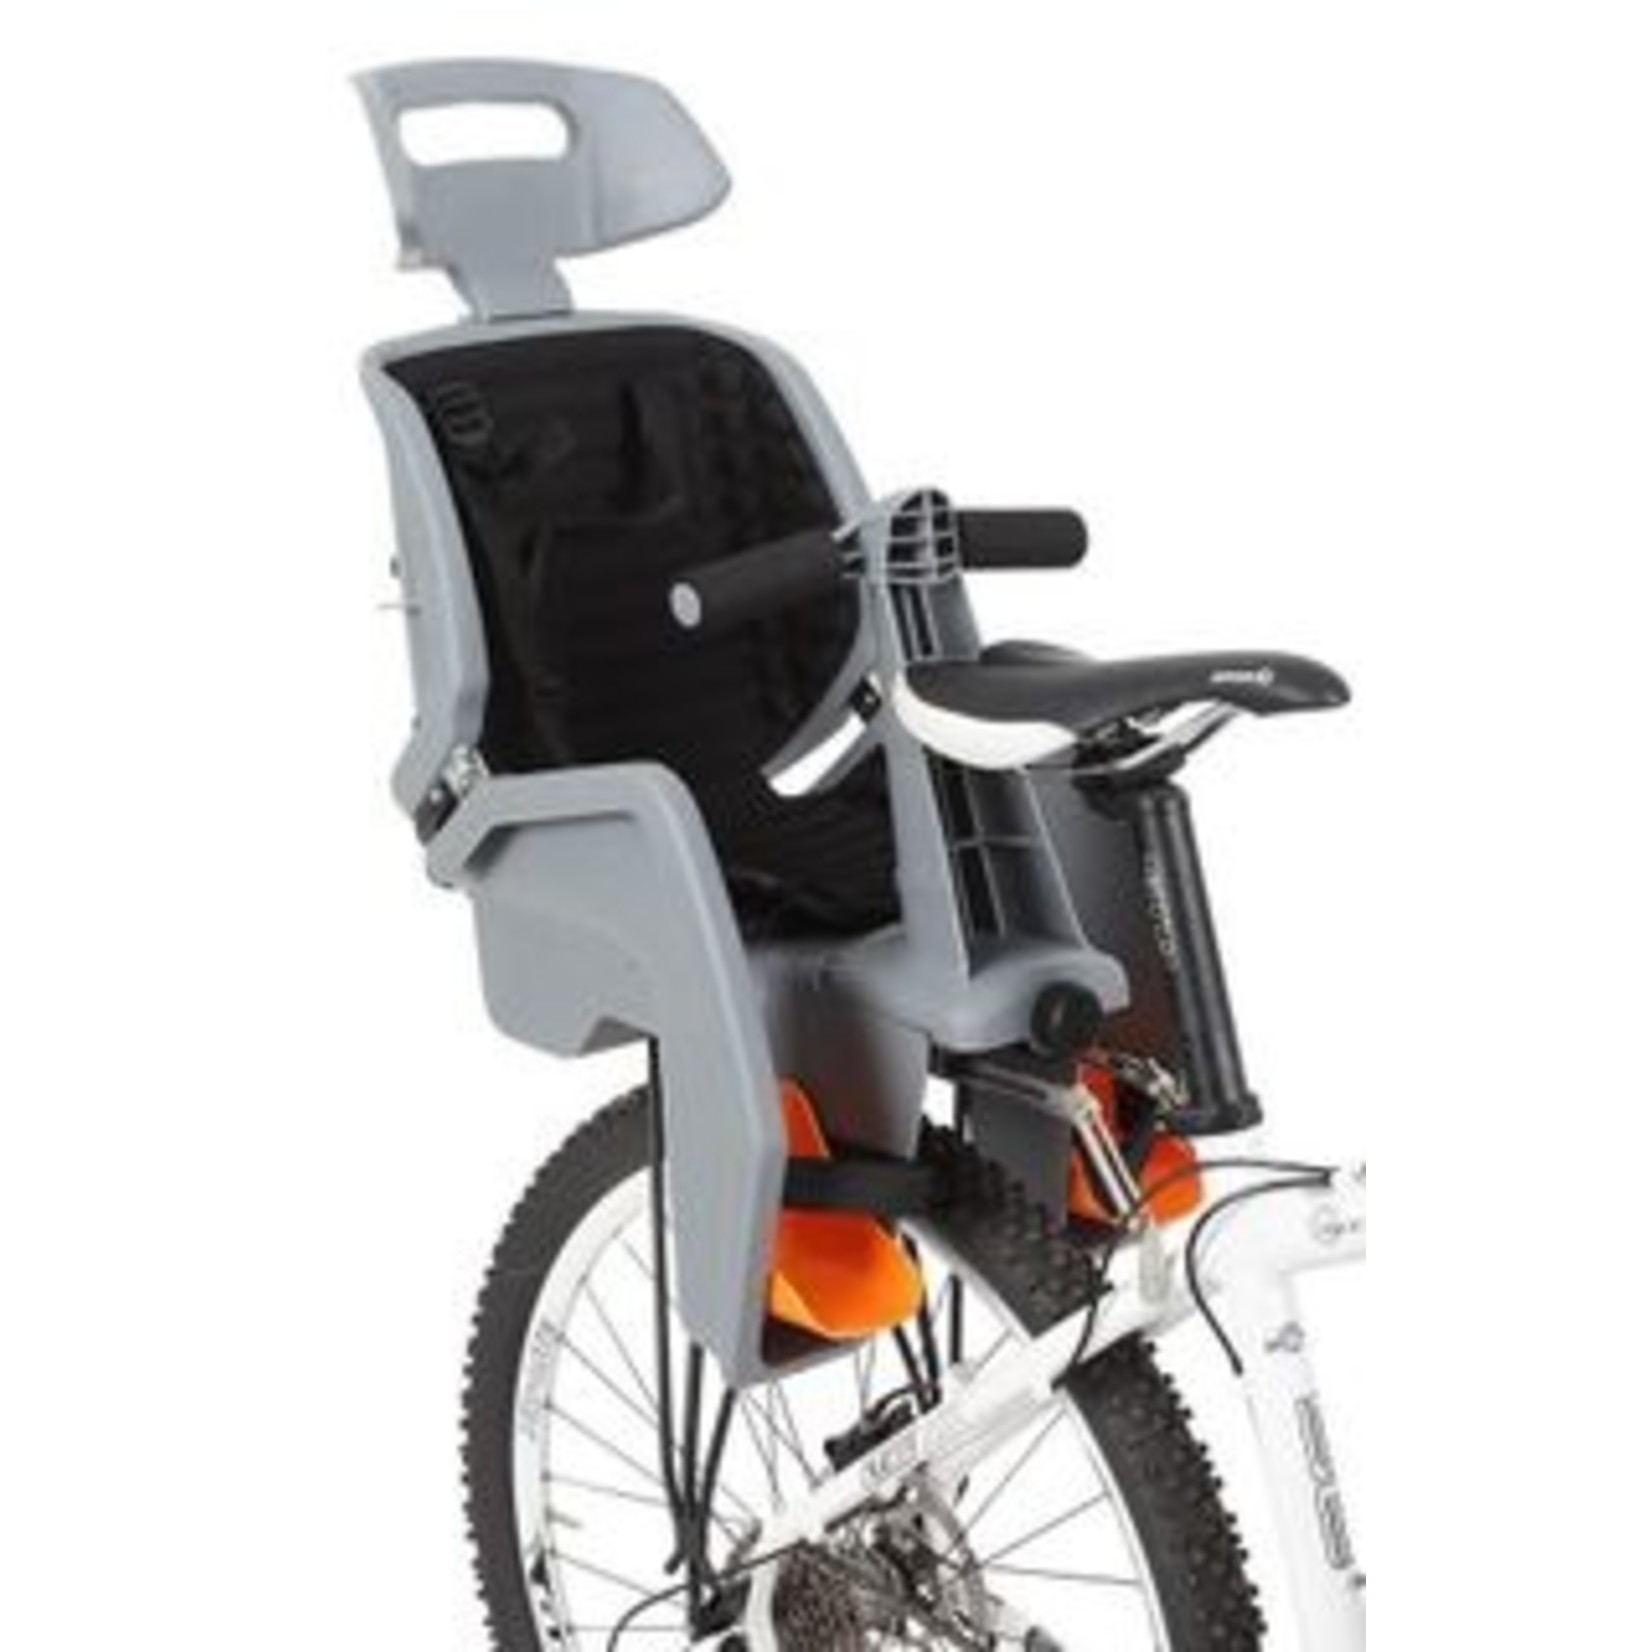 Beto Beto Bike/Cycling Baby Carrier Seat - Suits 27.5 Disc Bikes - Grey